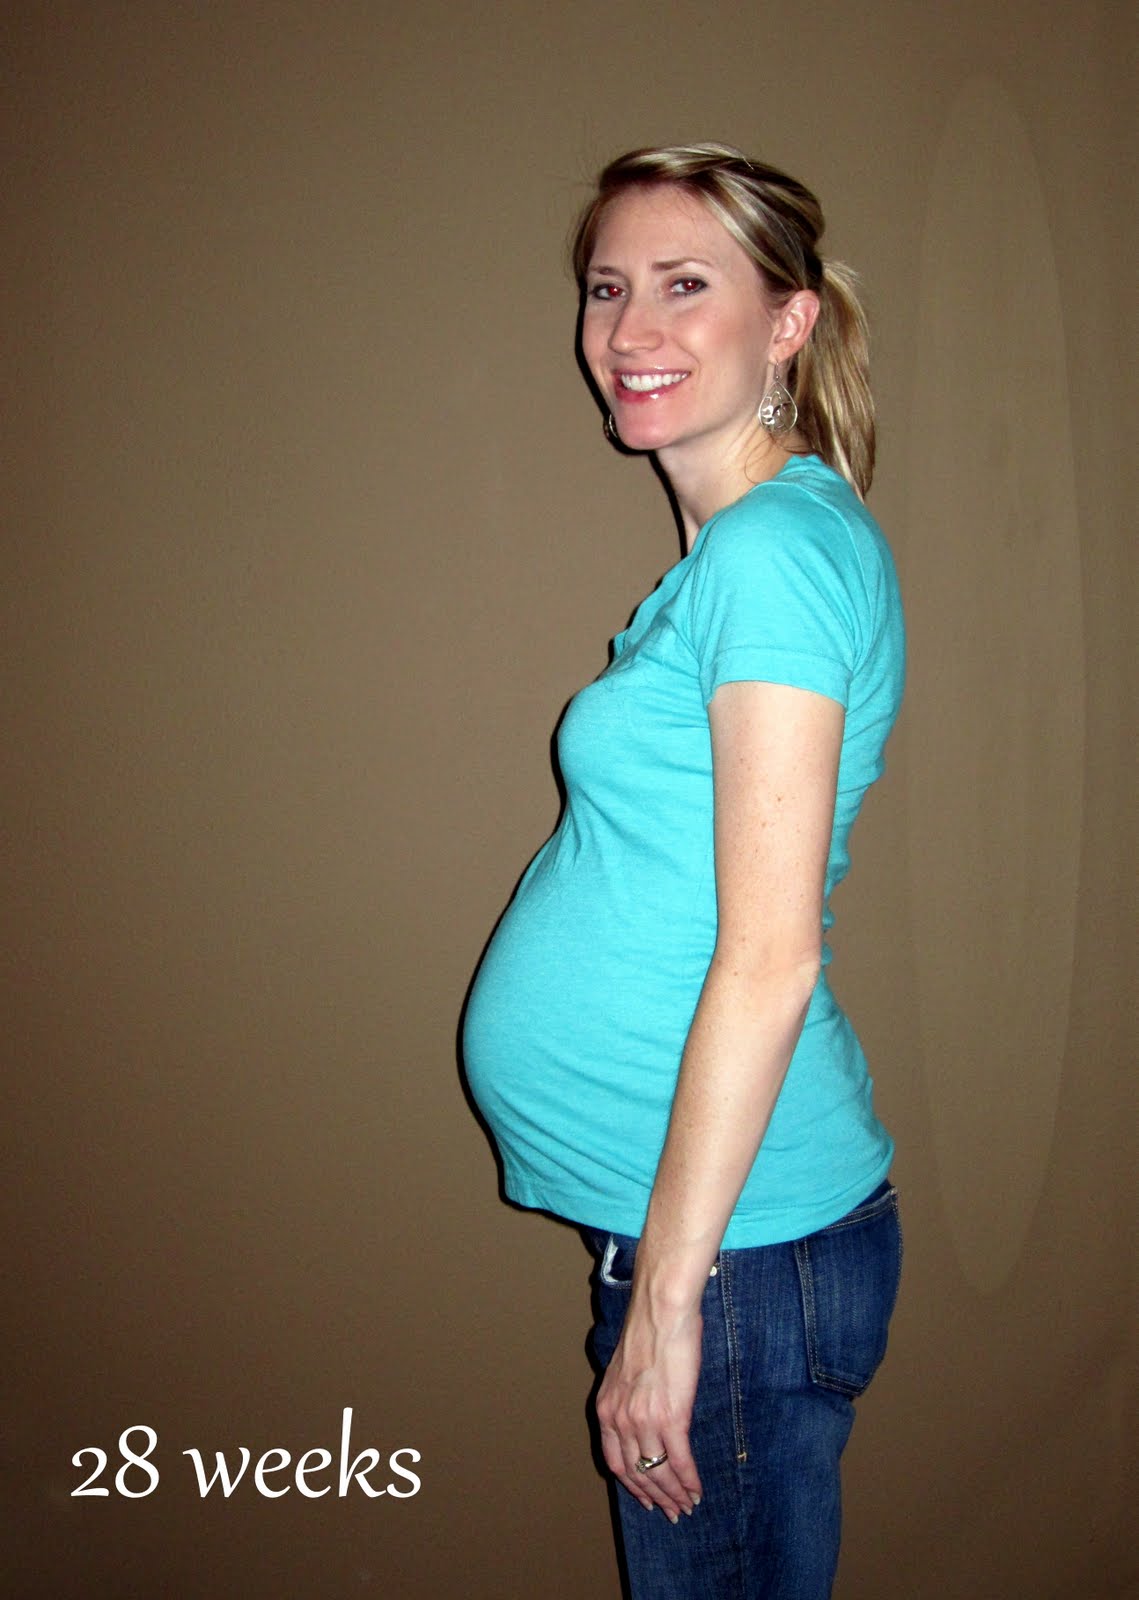 28 Weeks Pregnant Baby Brain Development: What to Expect